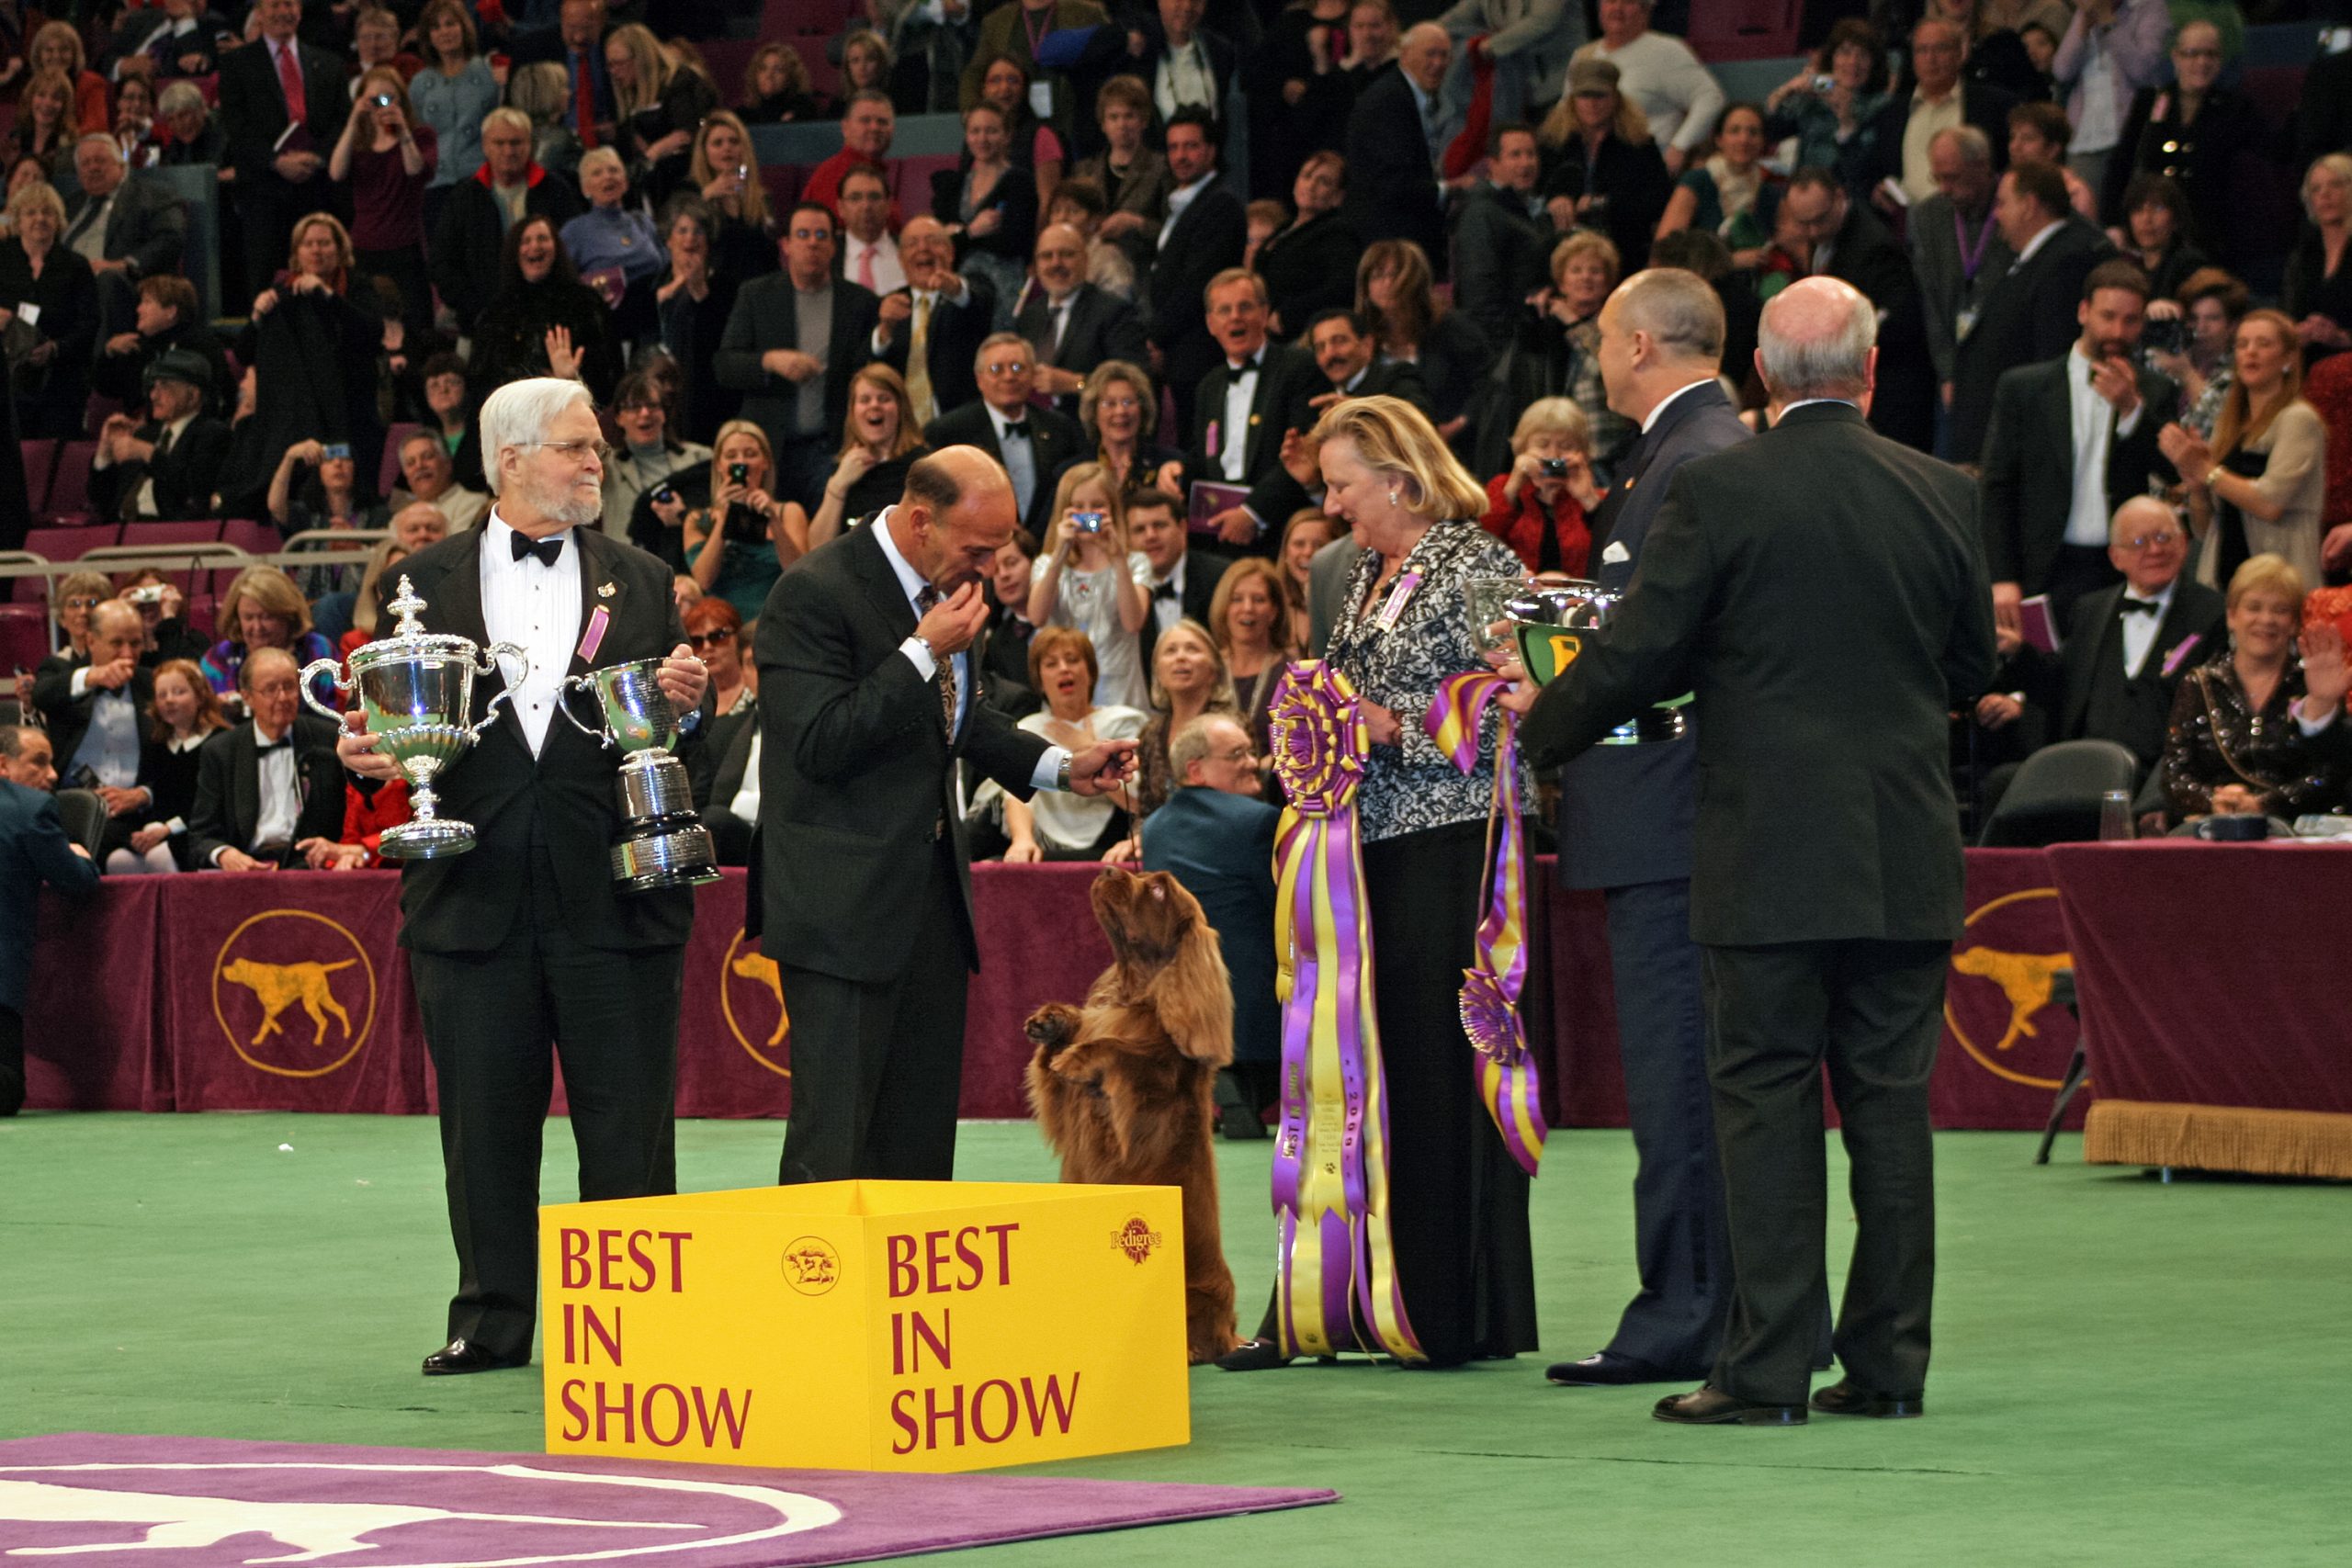 A Trip for Two to the 2022 Westminster Kennel Club Dog Show in New York